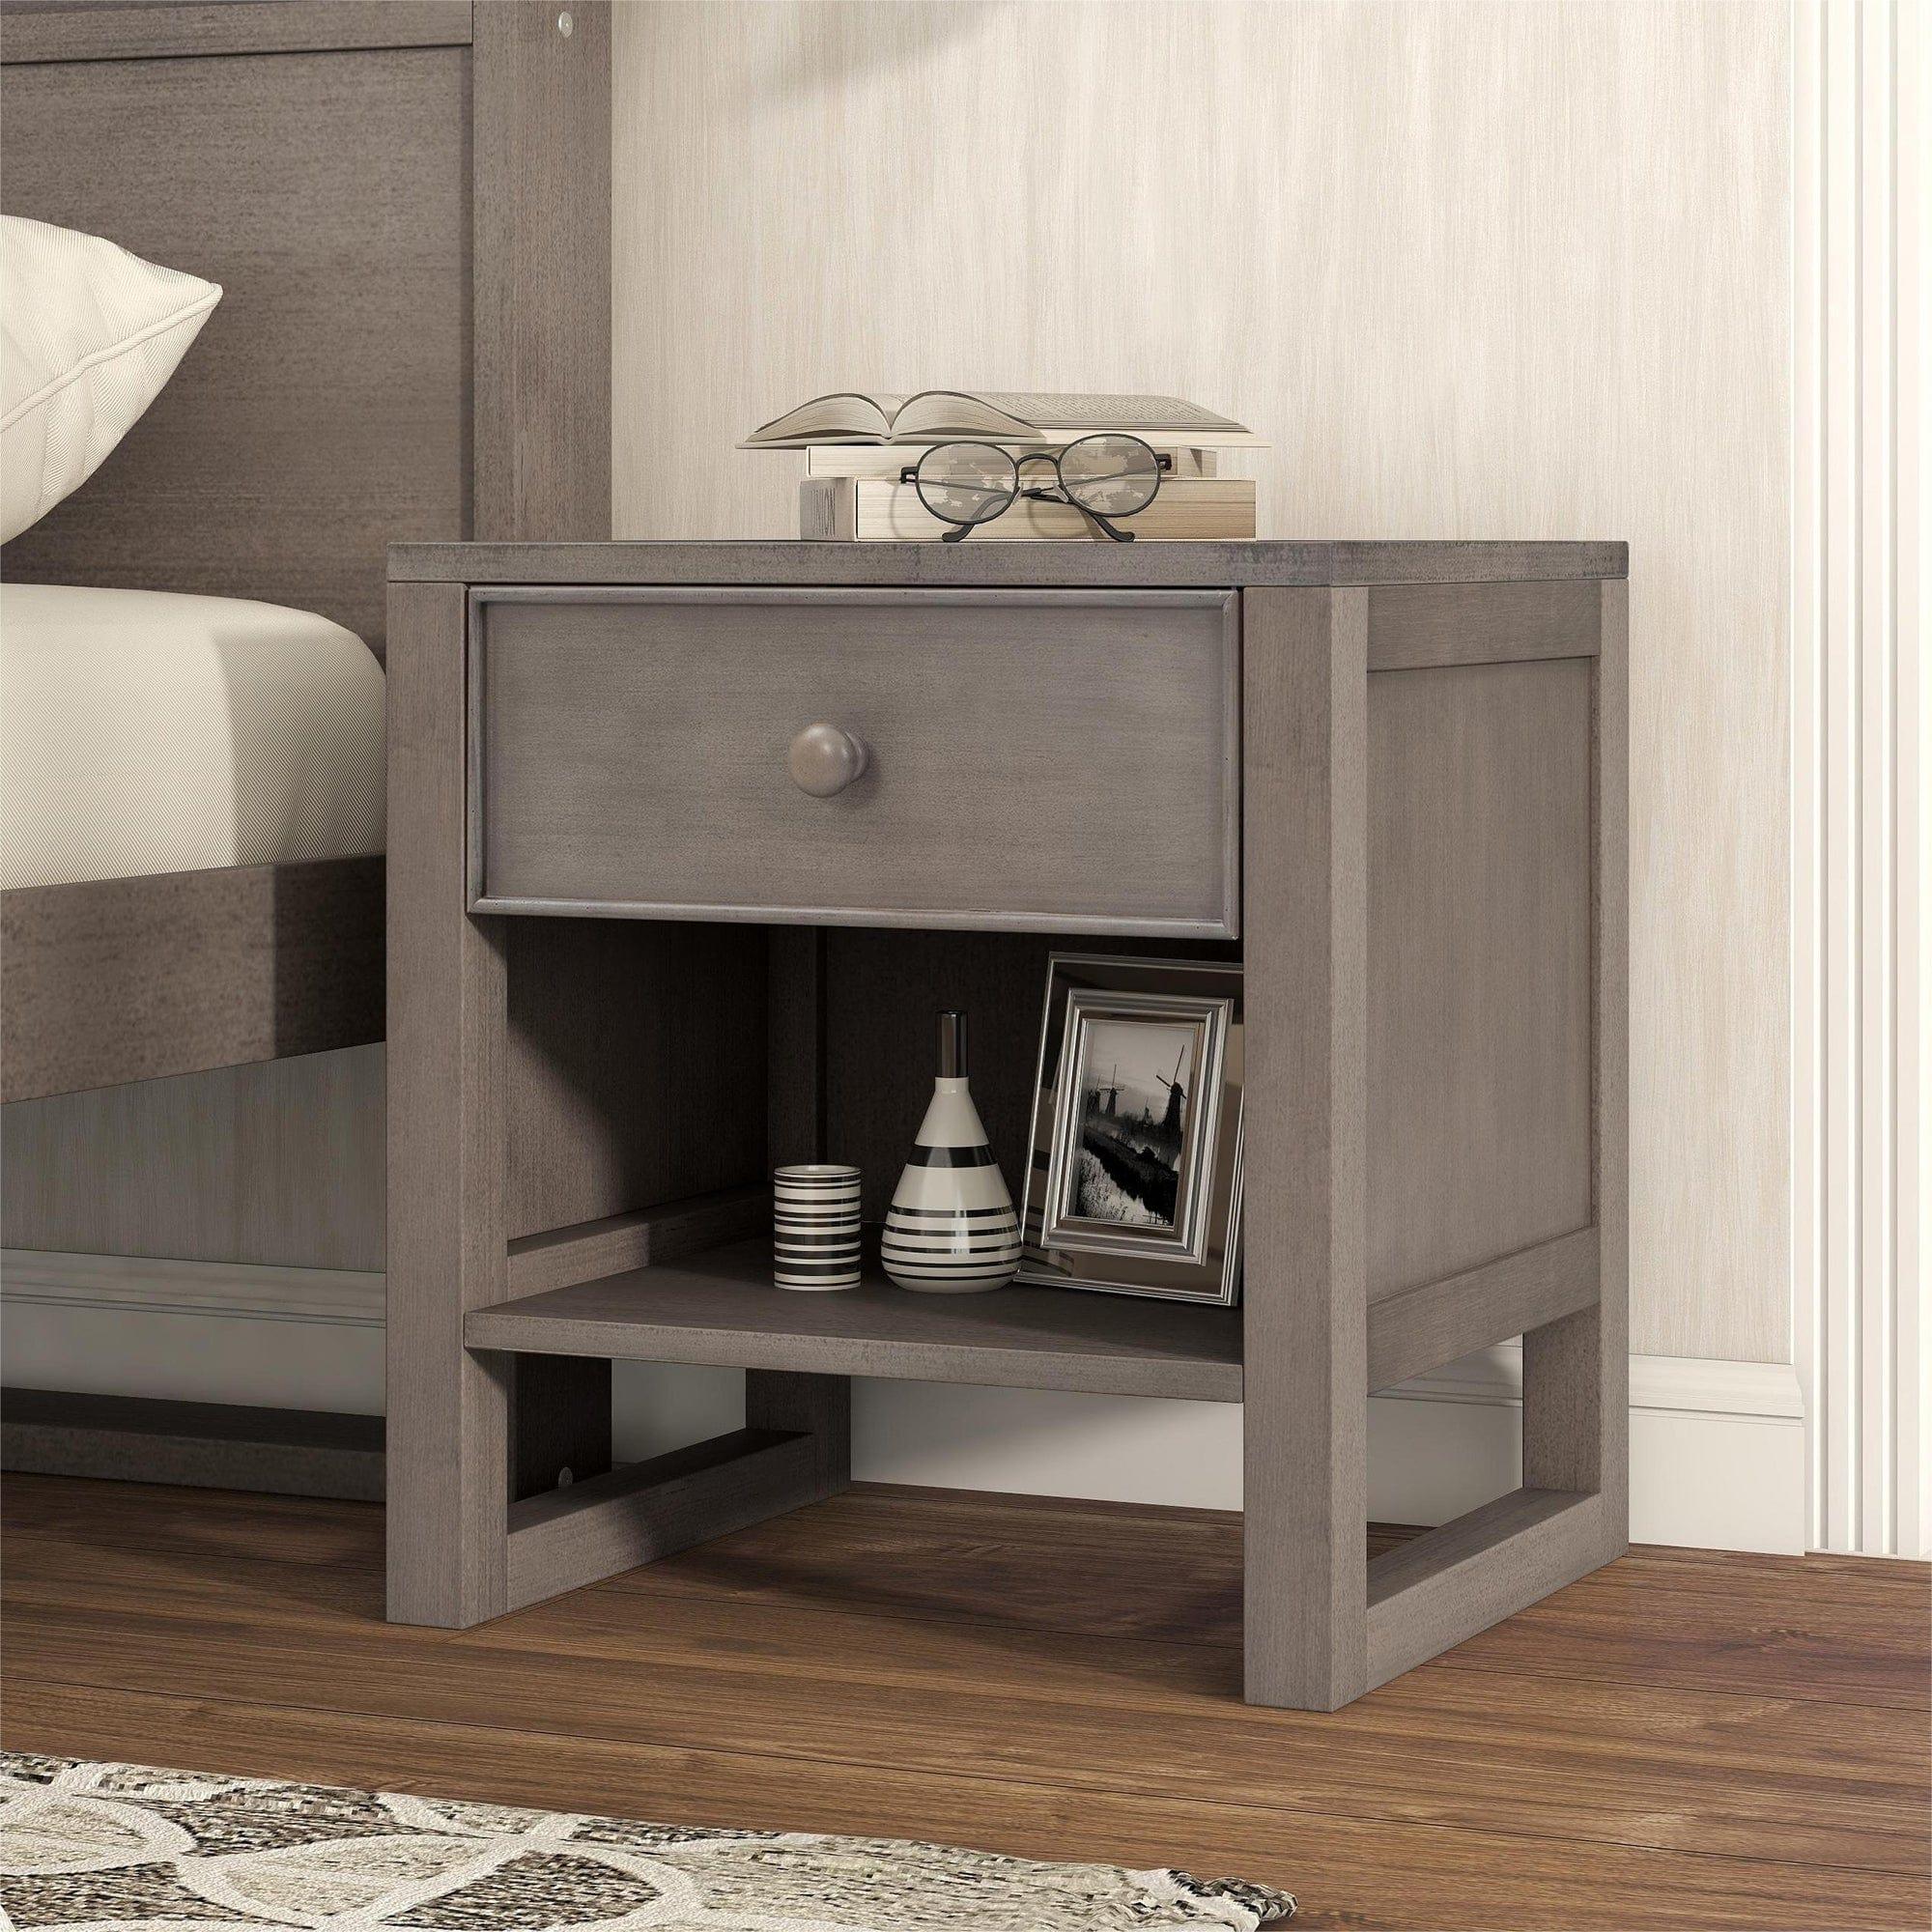 Shop Wooden Nightstand with a Drawer and an Open Storage,End Table for Bedroom,Anitque Gray Mademoiselle Home Decor